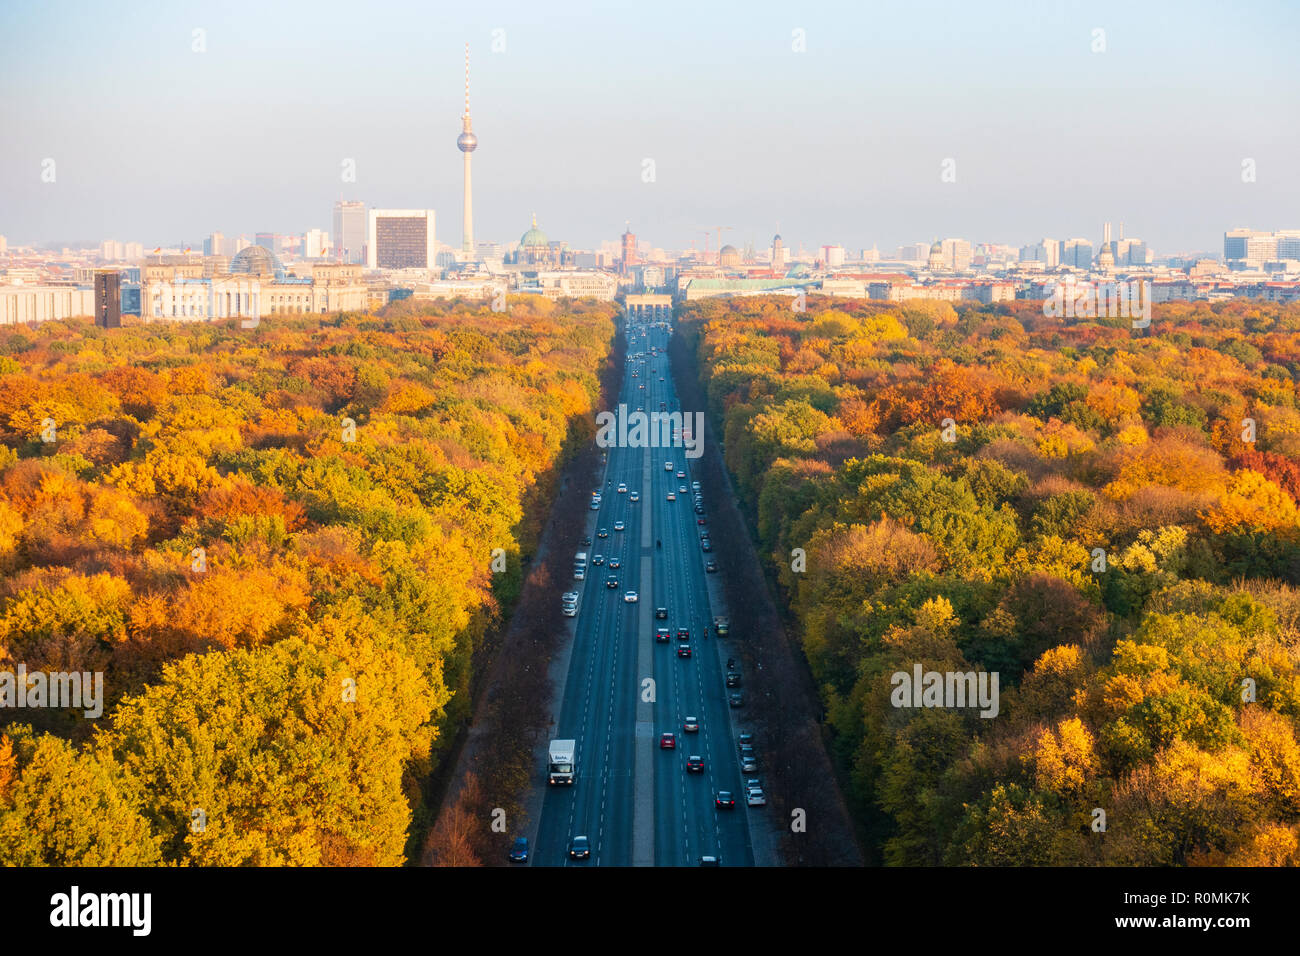 Berlin, Germany. 6 November, 2018. Spectacular late autumn colours of trees in Berlin's famous Tiergarten park in the centre of the city. The Brandenburg Gate and TV Tower are in the far distance. Credit: Iain Masterton/Alamy Live News Stock Photo